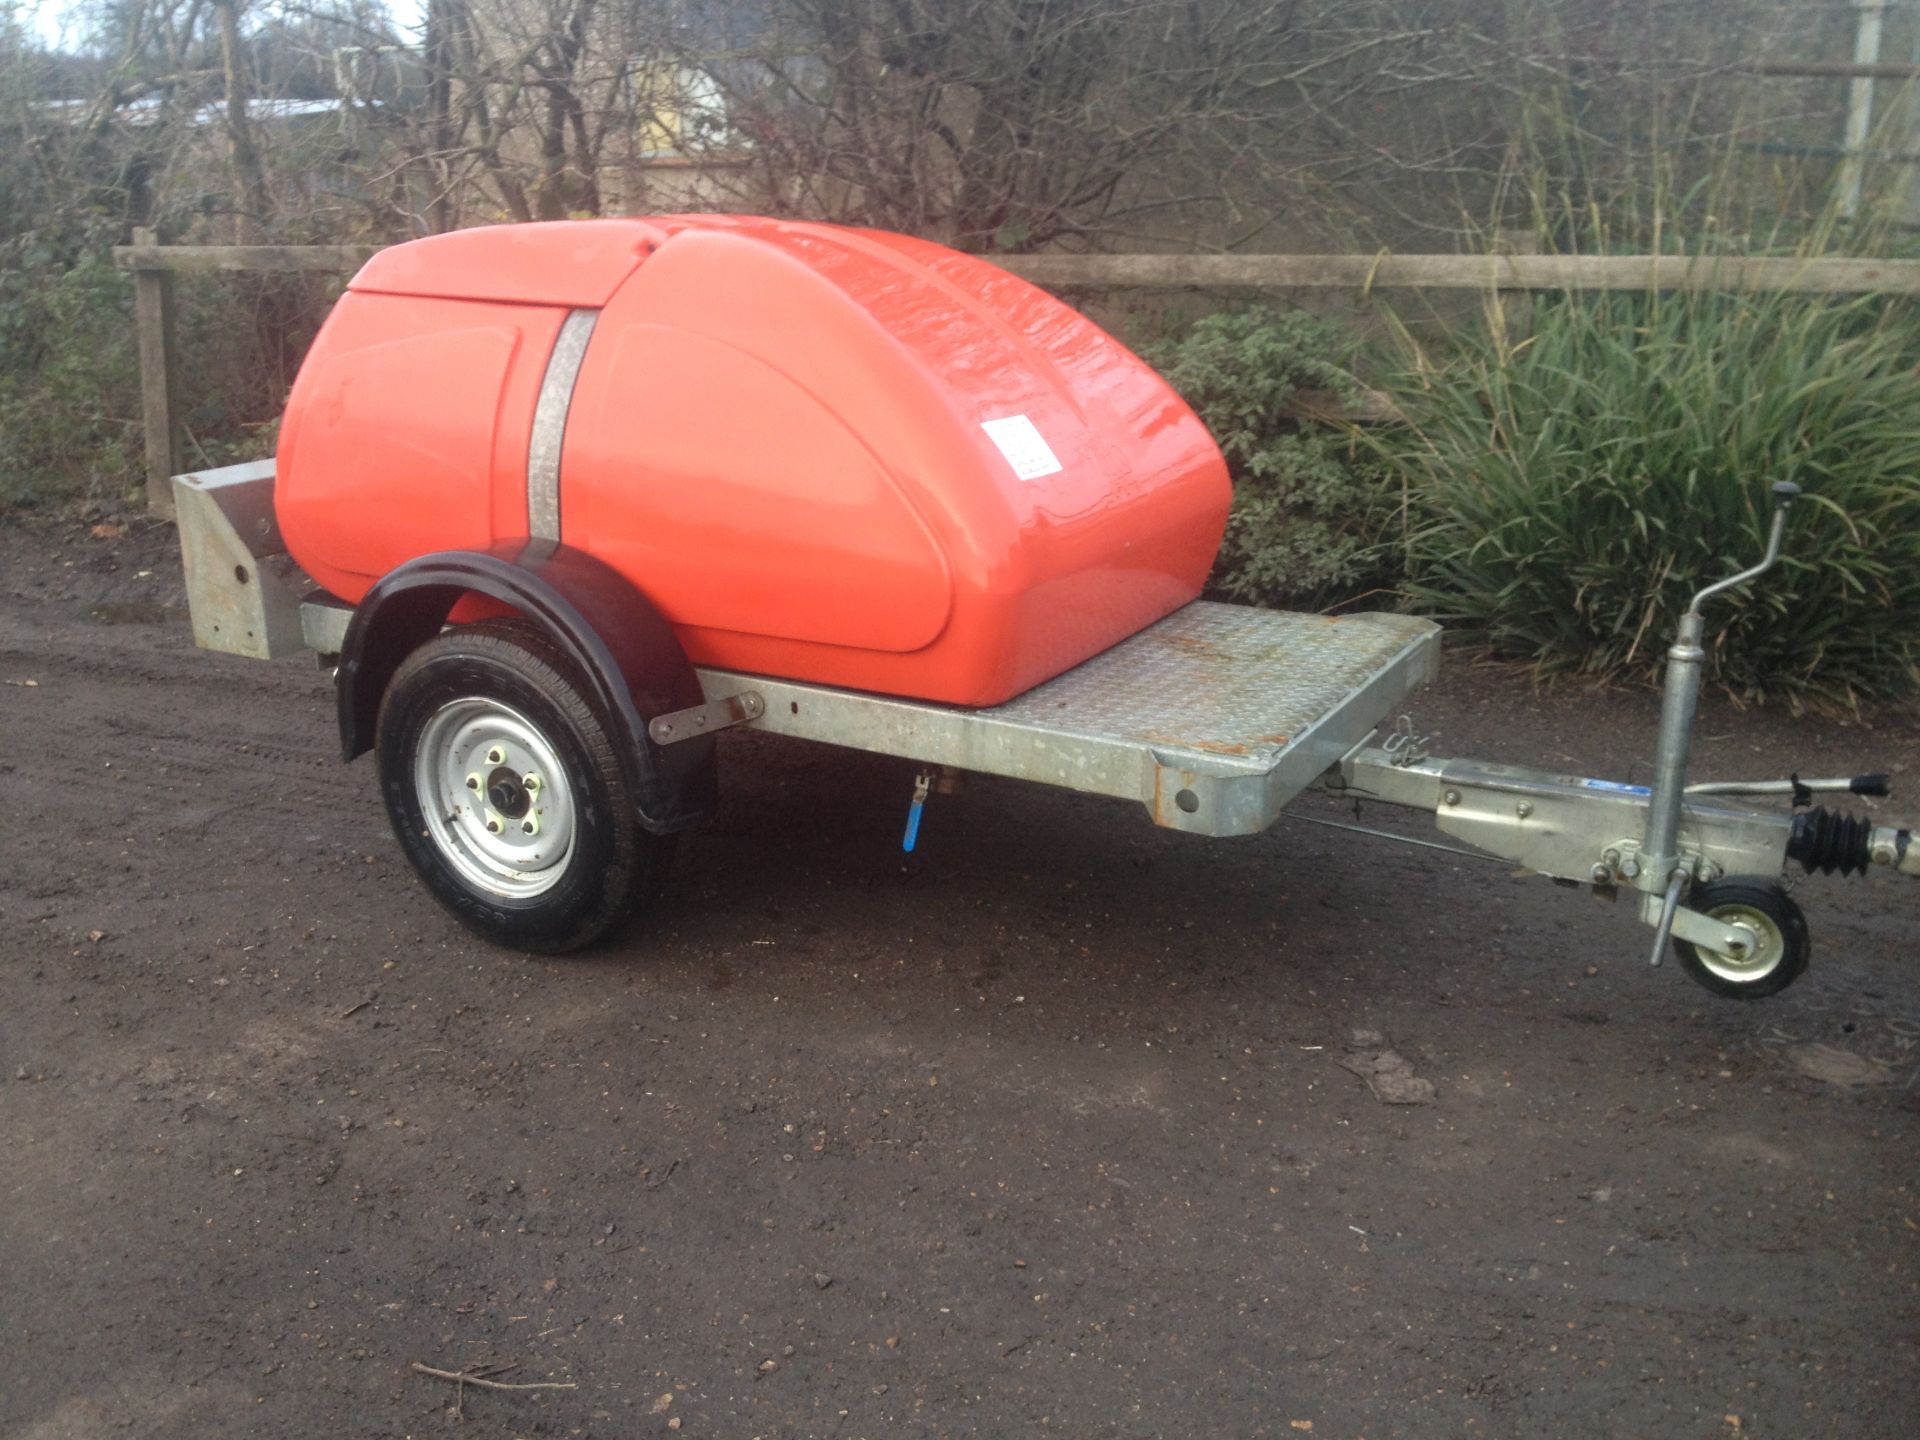 250 gall Water Bowser. Location Reading, Berkshire.